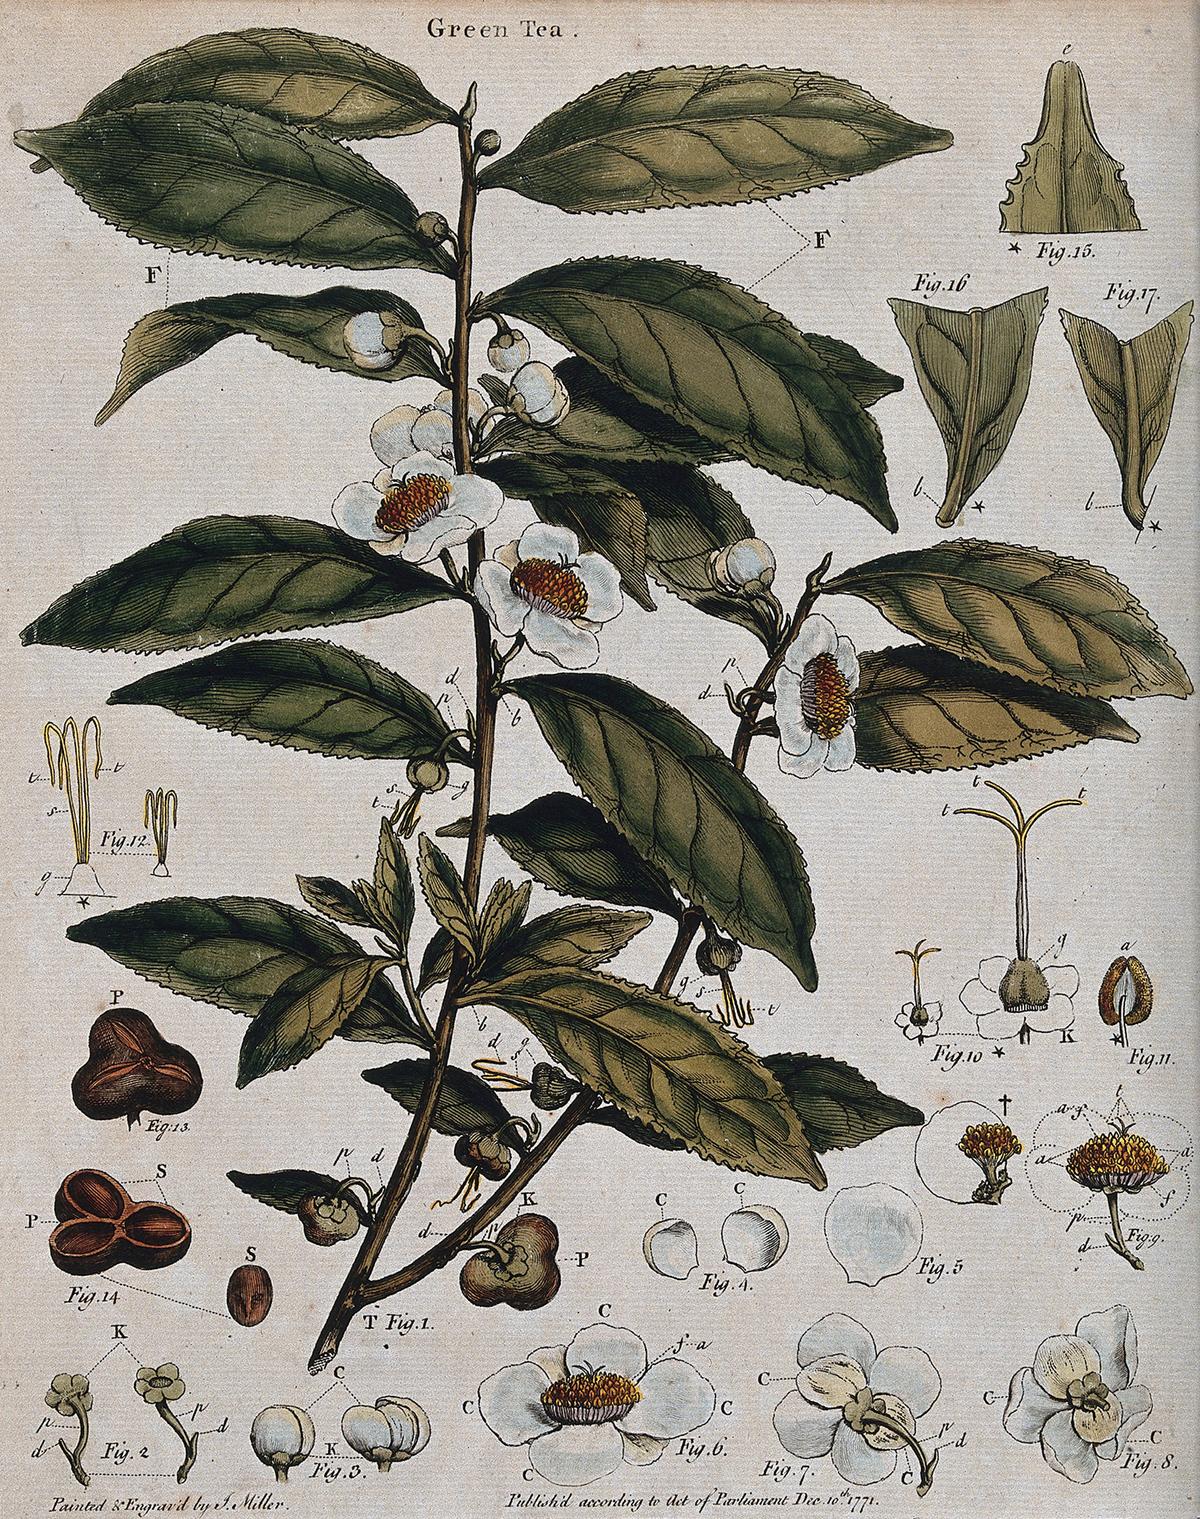 A colored engraving of the Tea plant (Camellia sinensis) with flowering stem, sectioned leaf, and floral segments, circa 1771, by J. Miller. (<a href="https://commons.wikimedia.org/wiki/File:Tea_plant_(Camellia_sinensis);_flowering_stem_with_sectioned_Wellcome_V0044086.jpg" target="_blank" rel="nofollow noopener">Wellcome Images</a>/<a href="https://creativecommons.org/licenses/by/4.0/deed.en" target="_blank" rel="nofollow noopener">CC BY 4.0 DEED</a>)